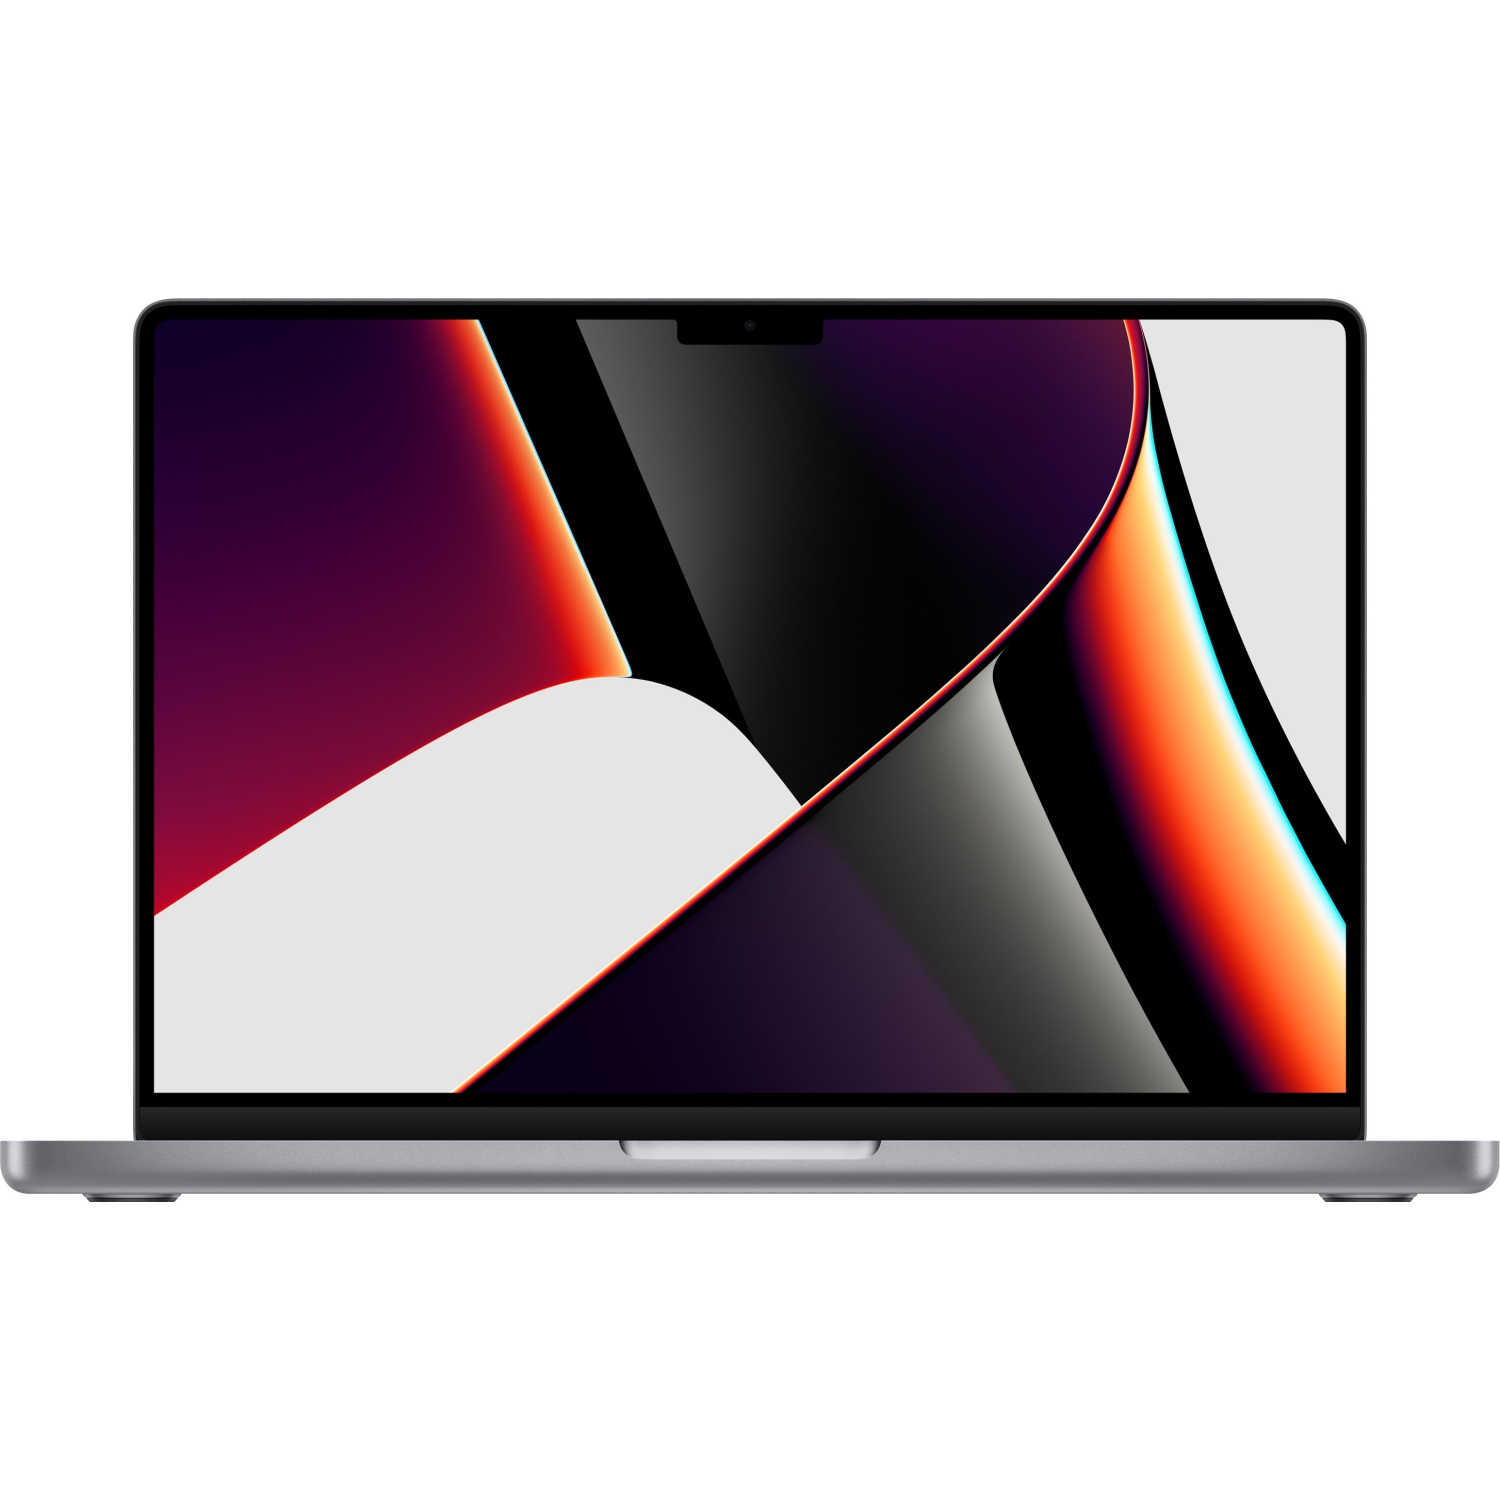 Refurbished (Excellent) - Apple MacBook Pro 14" (2021) - Space Grey (Apple M1 Max Chip / 512GB SSD / 32GB RAM) - English